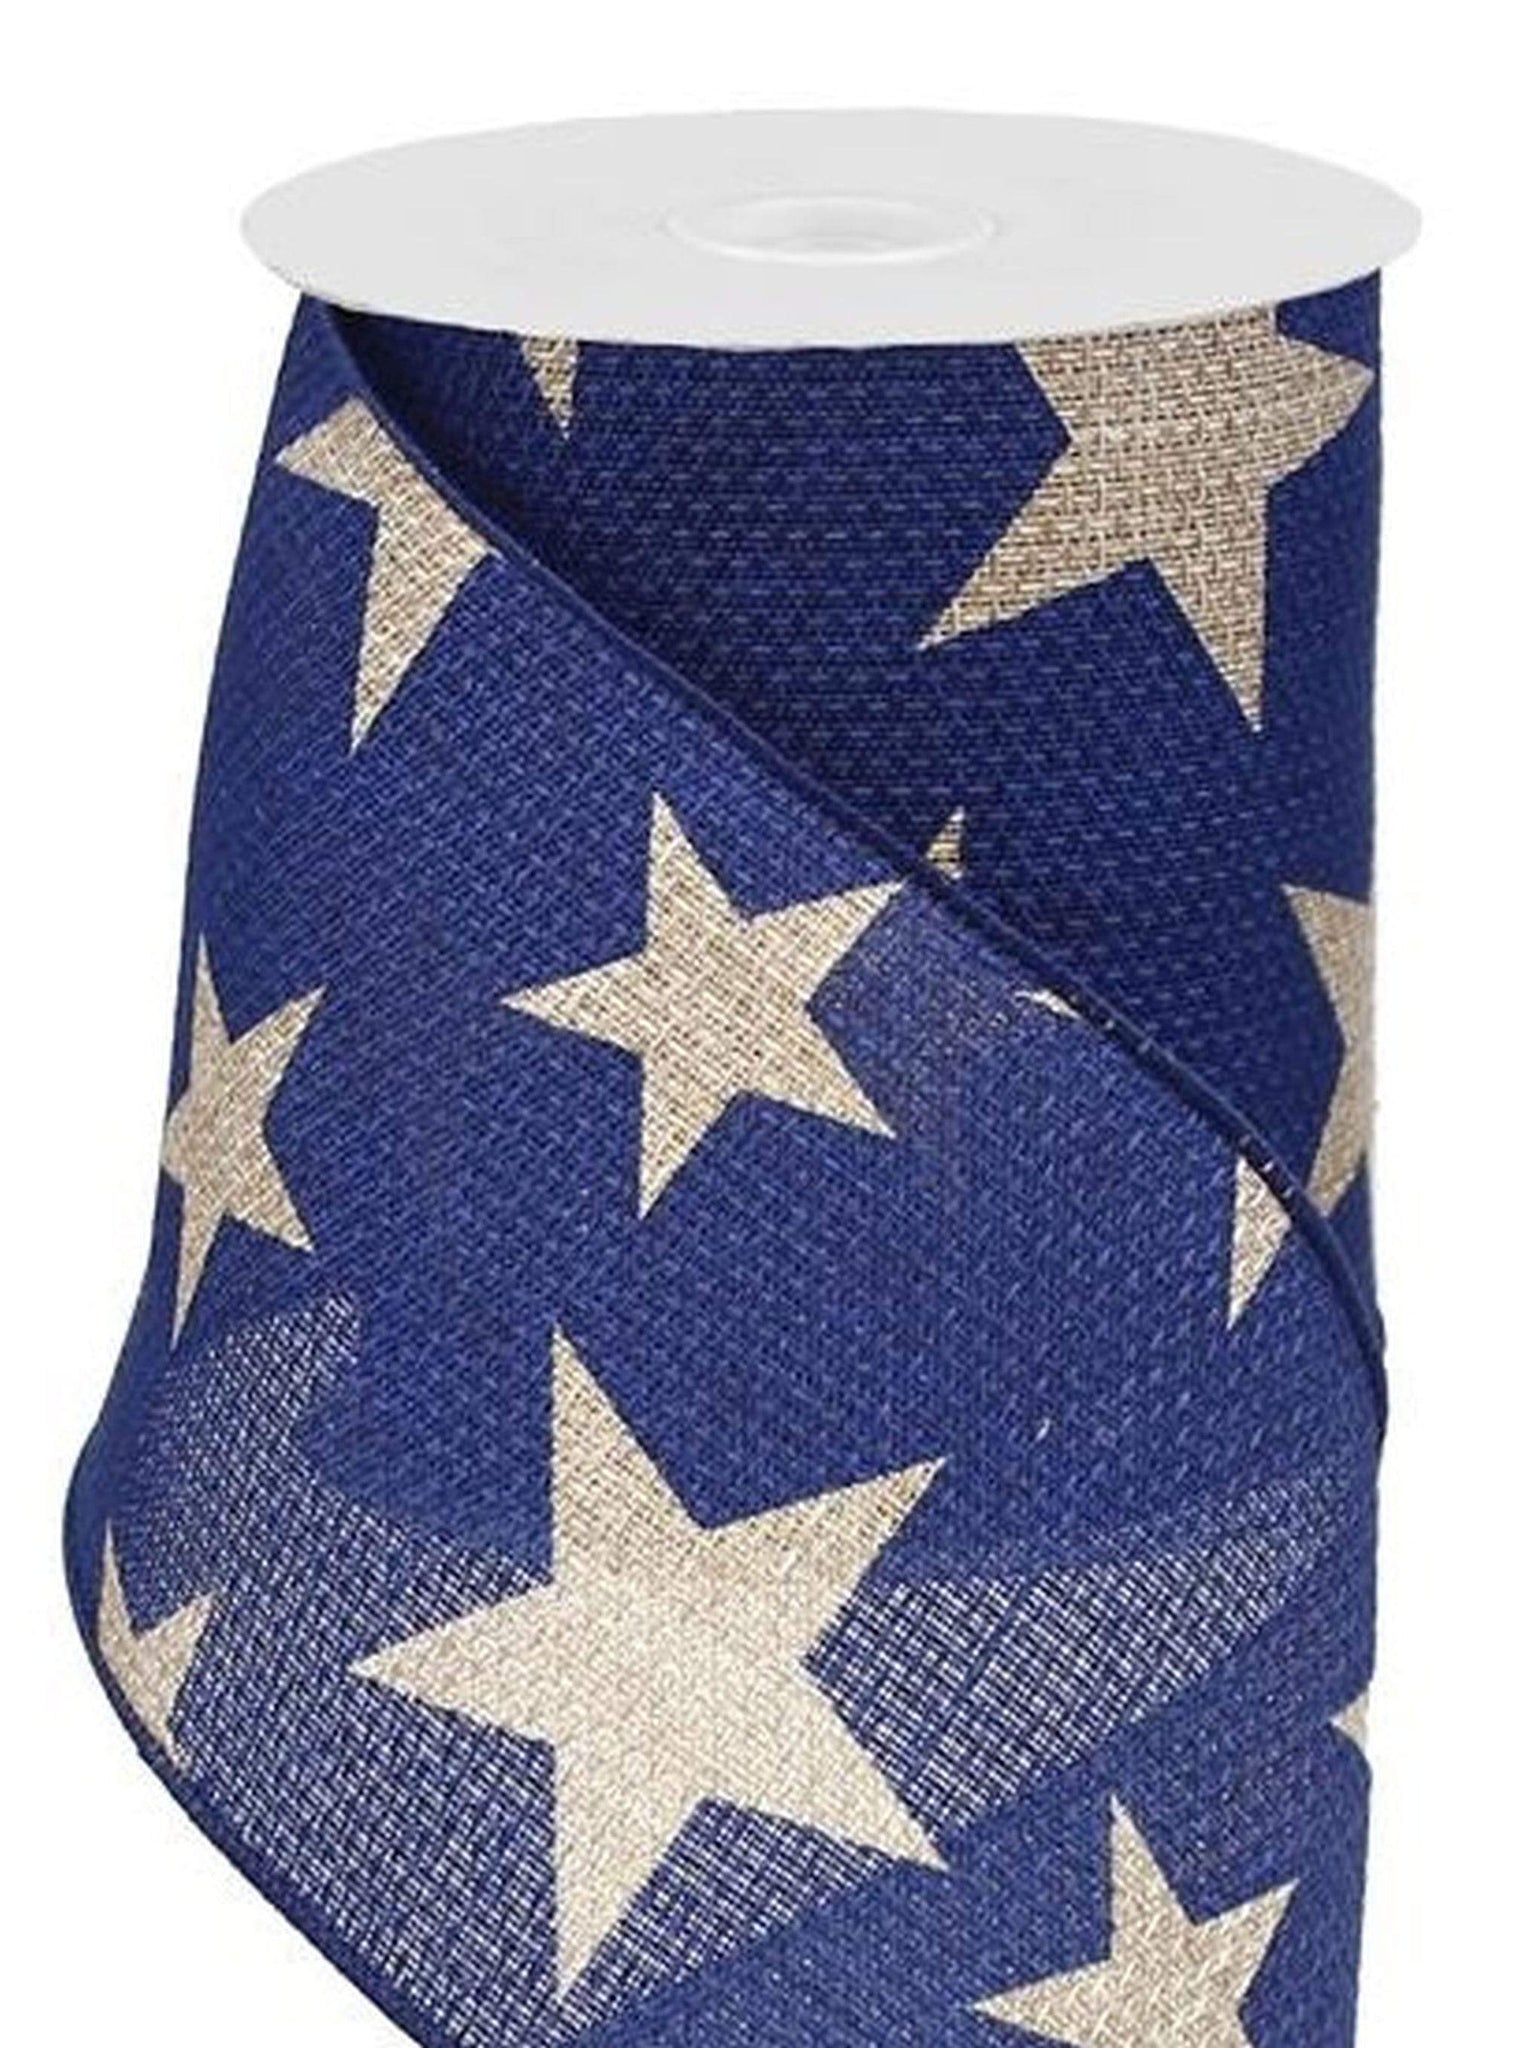 CleverDelights 4 Navy Burlap Ribbon - Wired Edges - 10 Yards